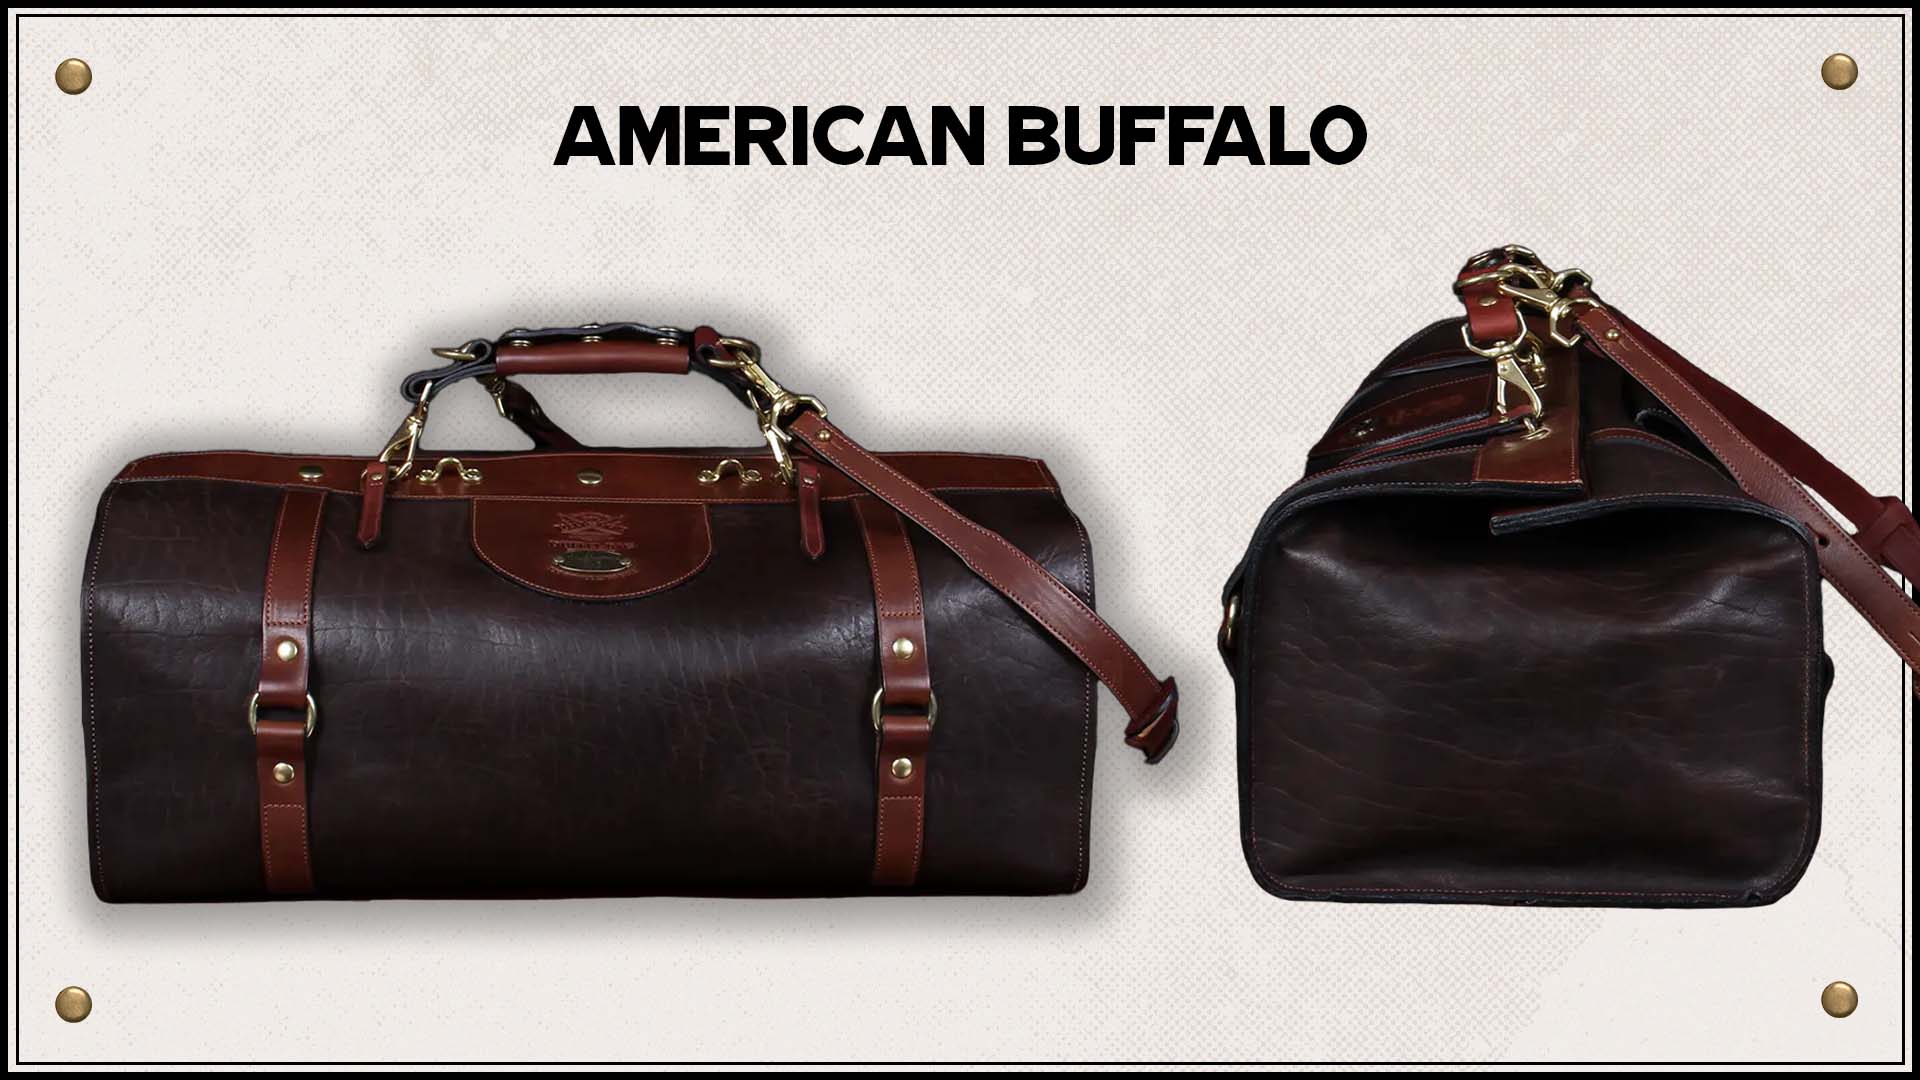 No. 1 Duffel Bag front and side view in American Buffalo